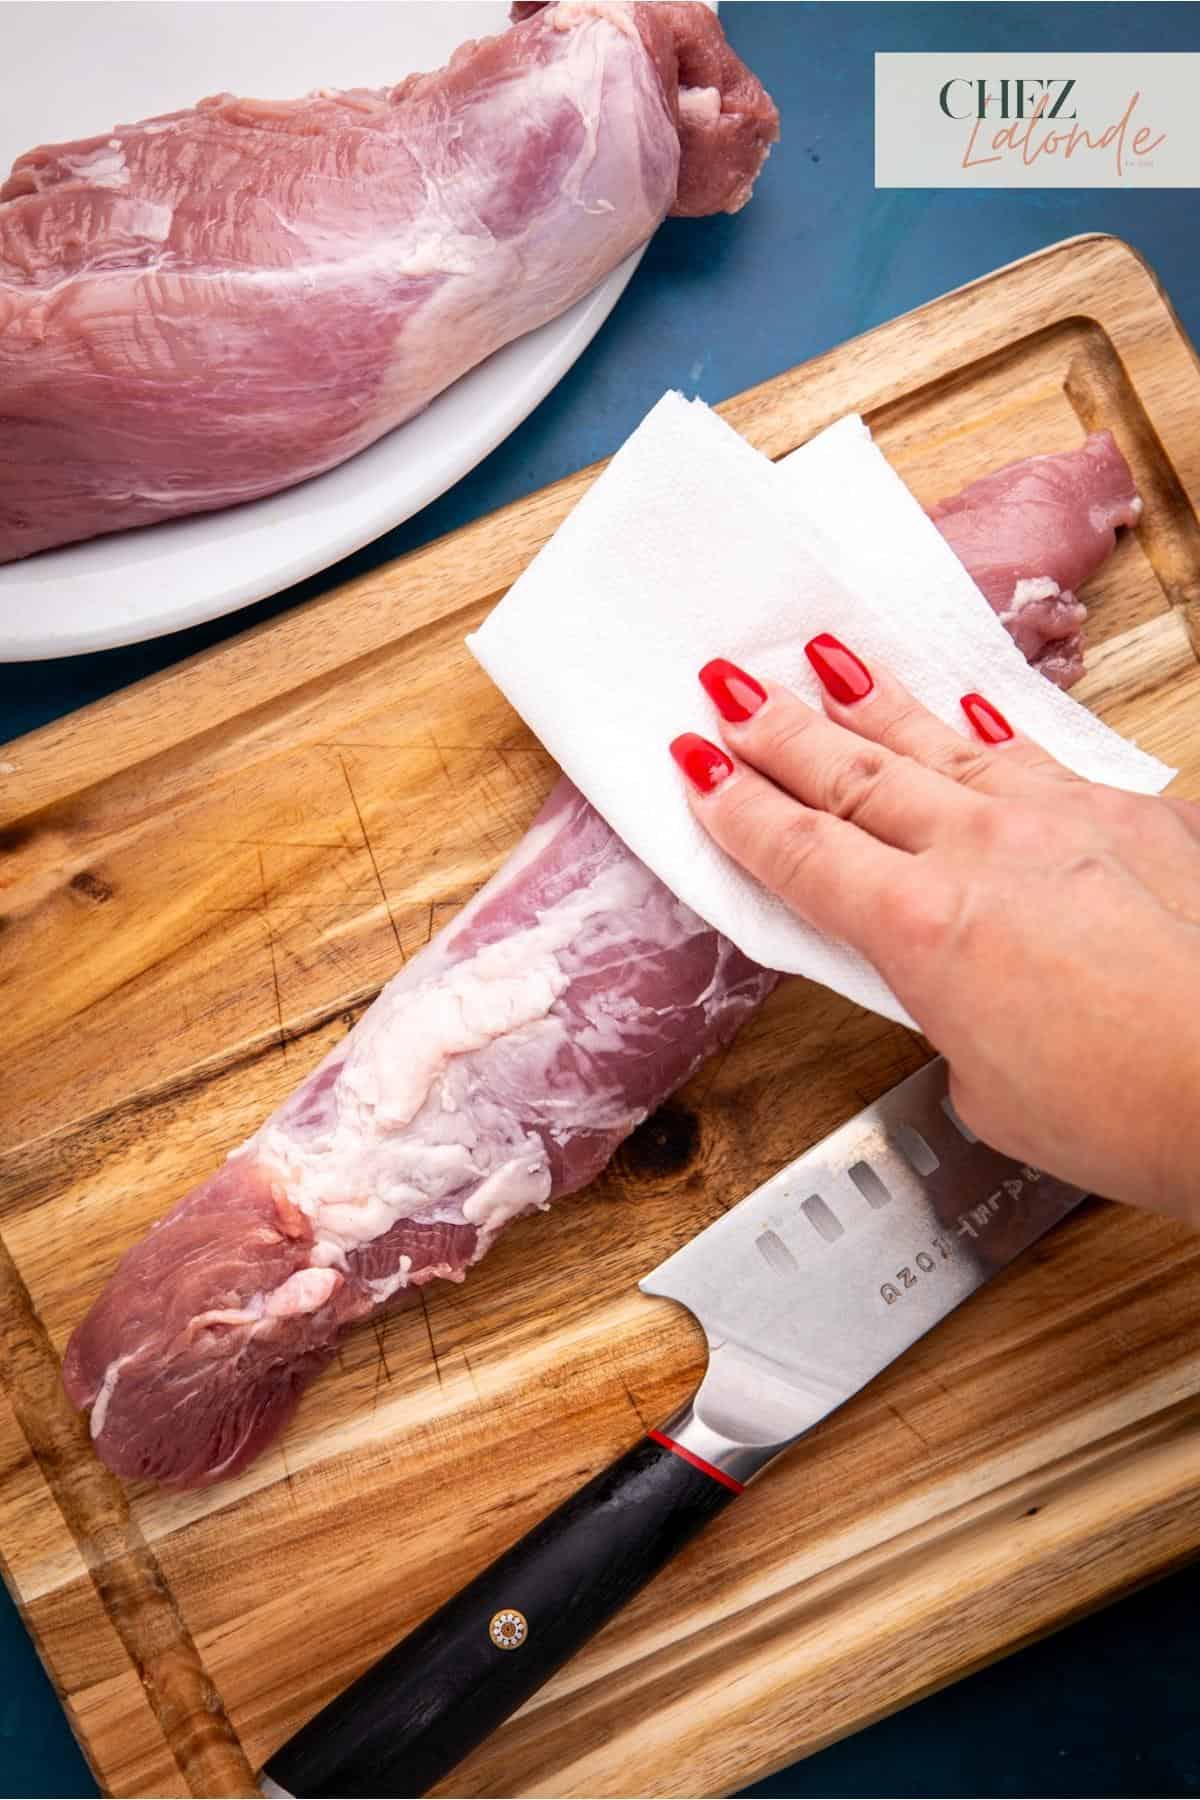 Using a paper towel to pat dry the pork tenderloin after washing it in the sink. 